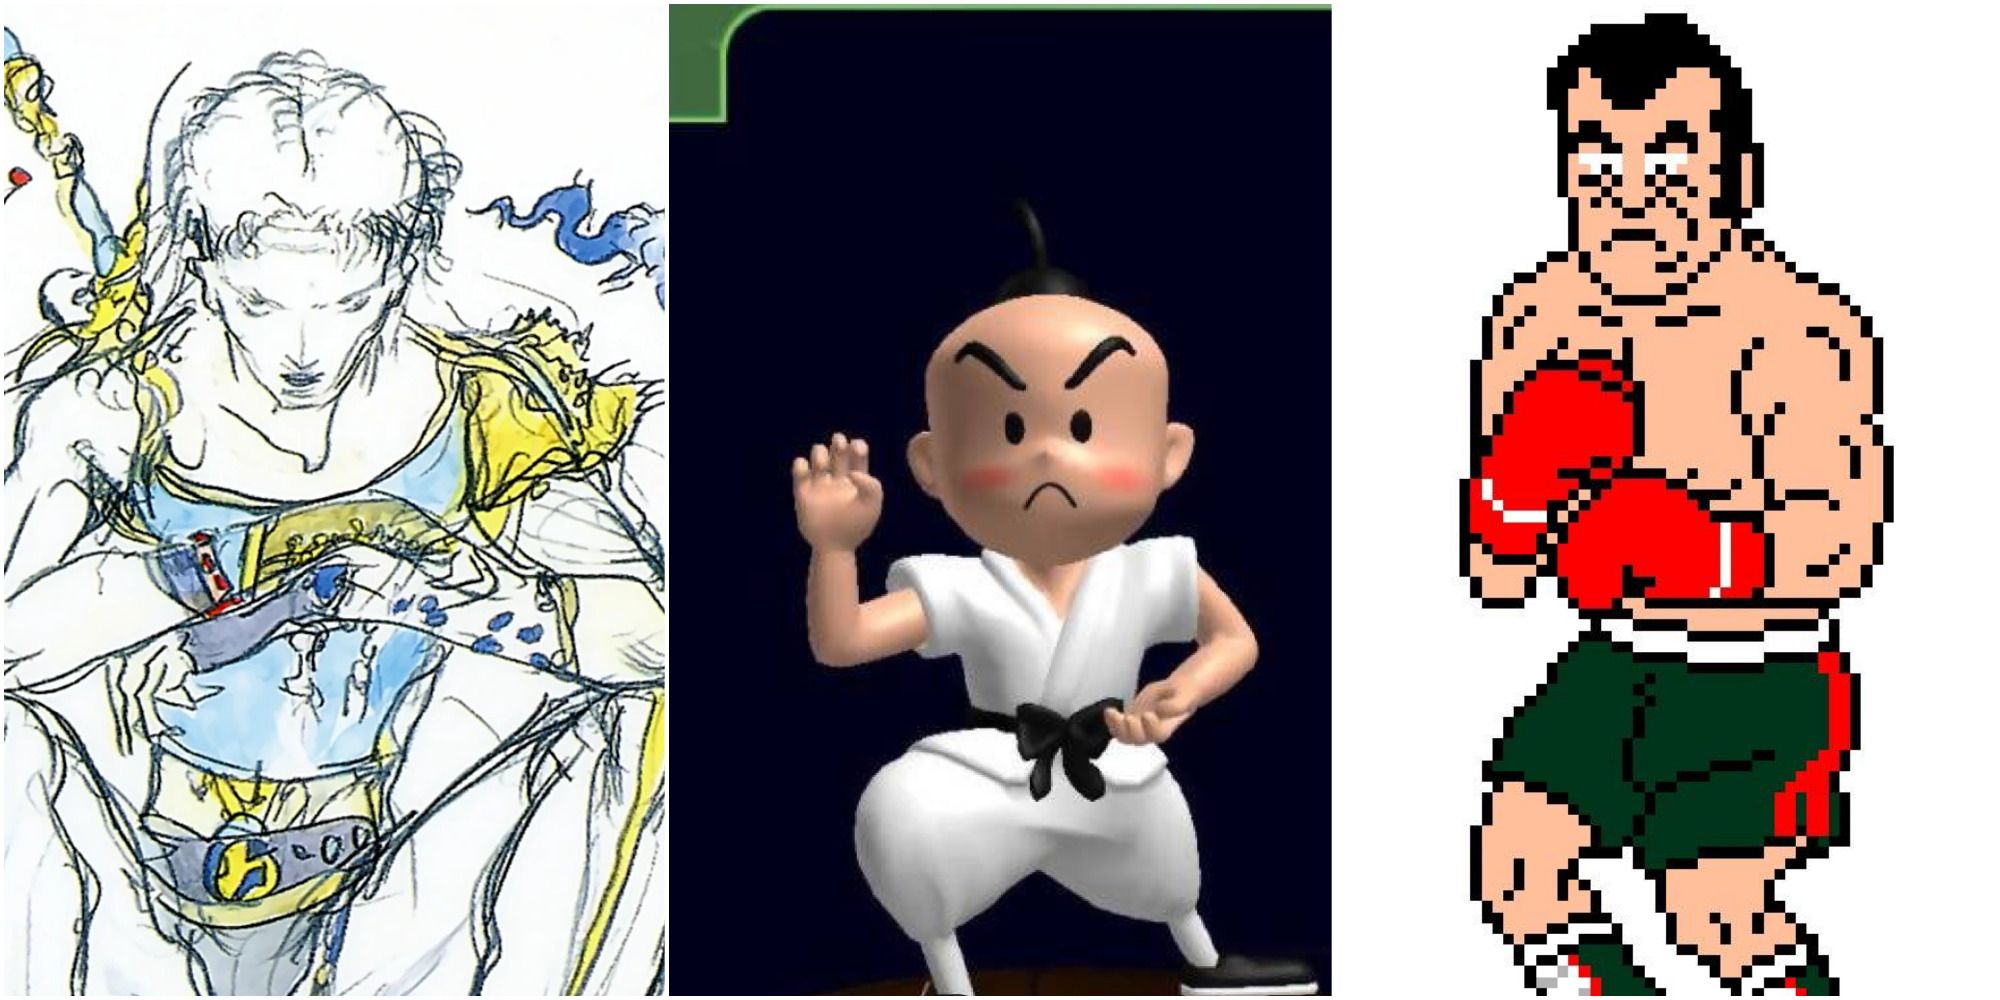 A collage featuring Butz from Final Fantasy V (as drawn by Yoshitaka Amano), Poo from Earthbound, and Pizza Pasta from Punch-Out!!